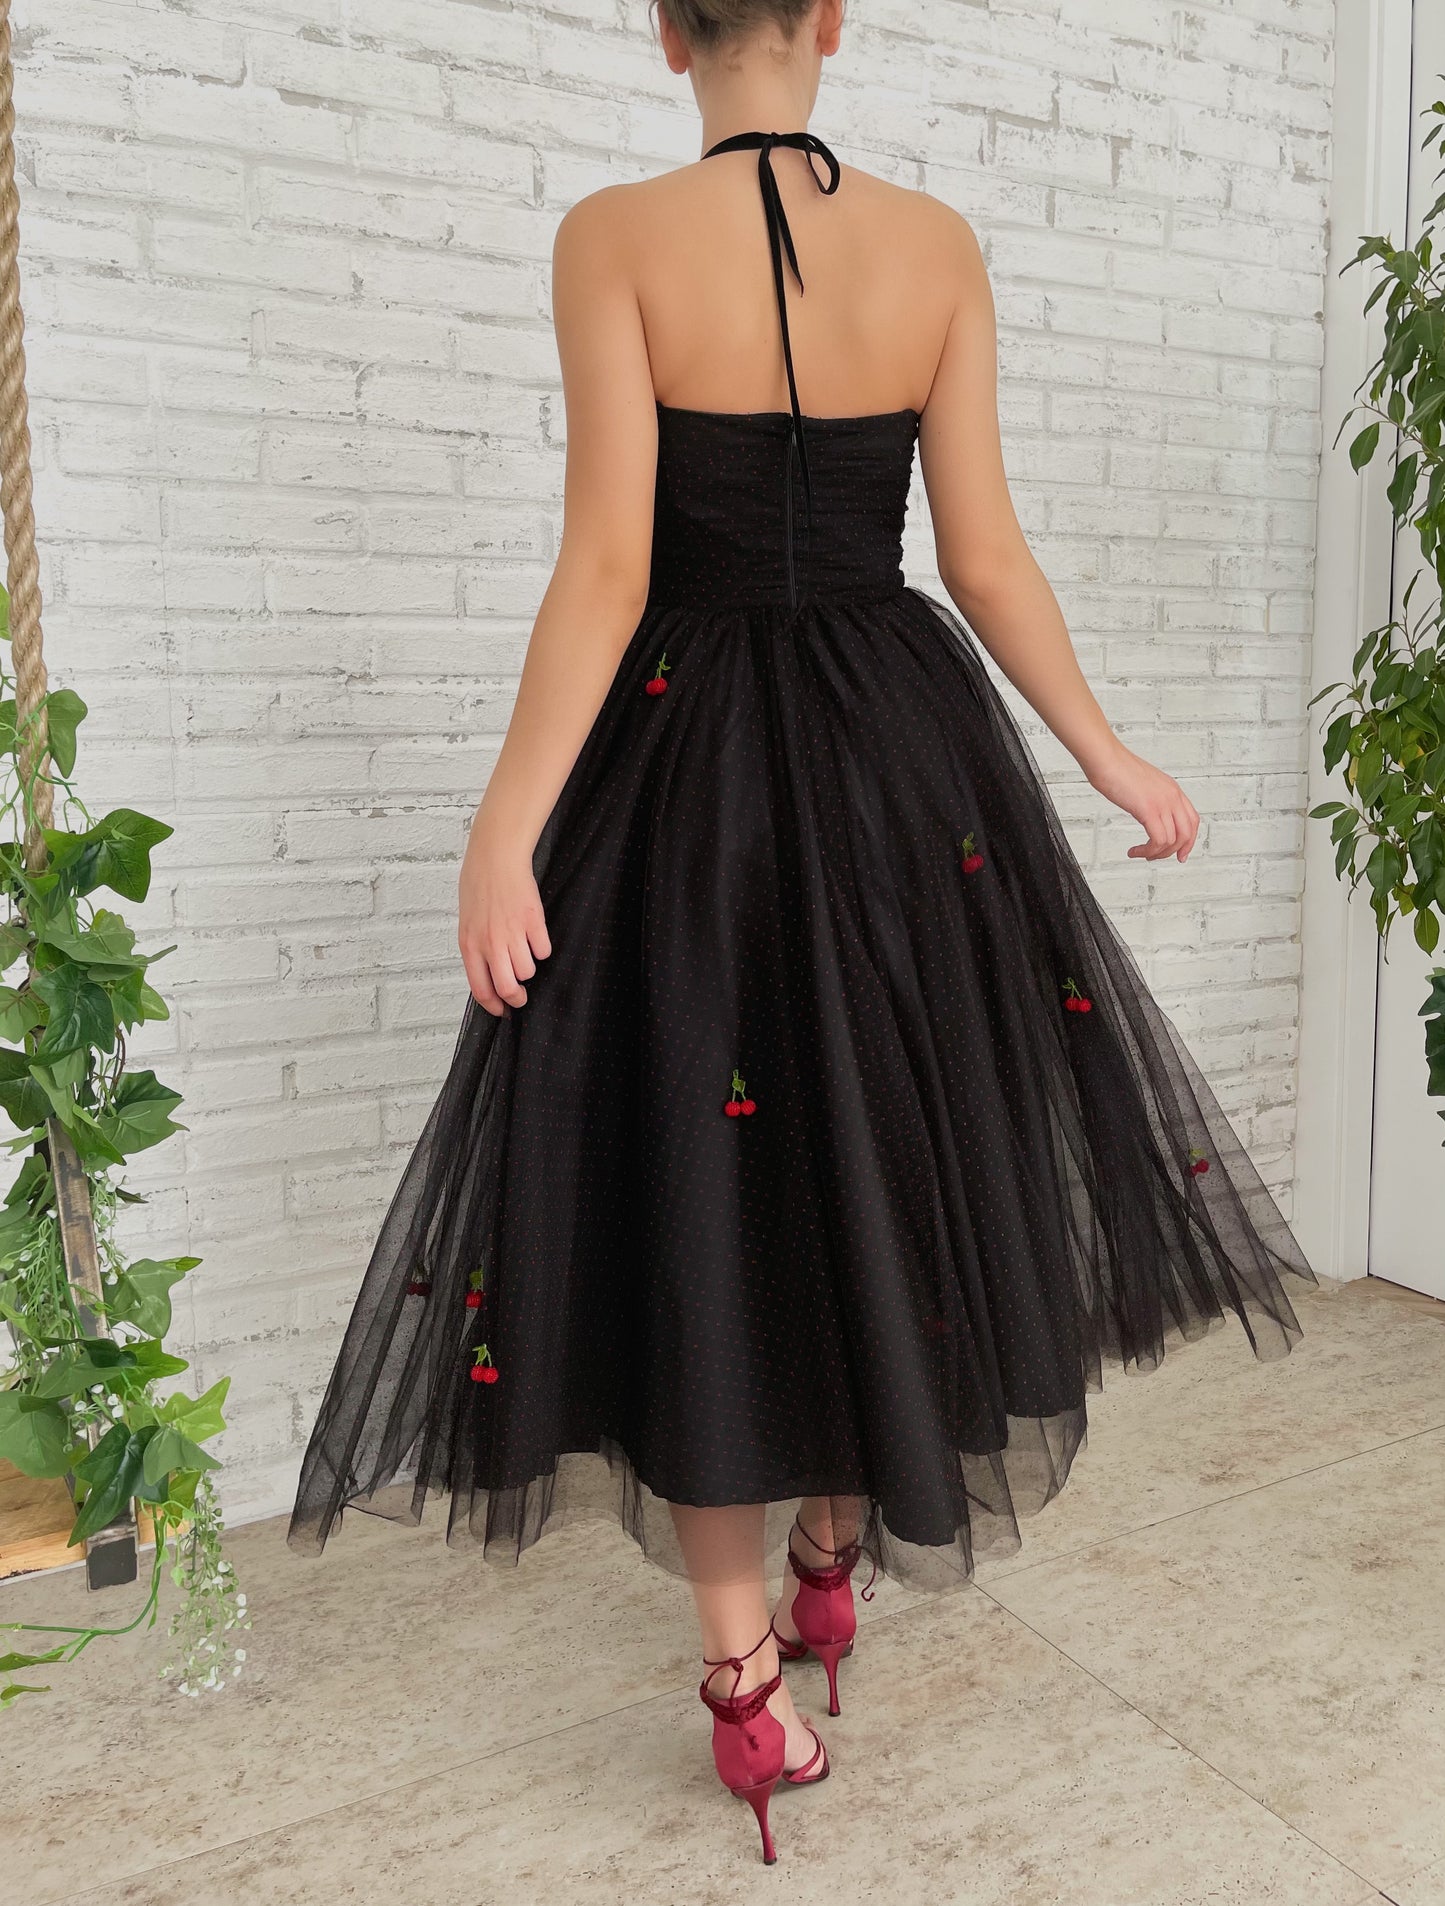 Black midi dress with spaghetti straps and embroidered cherries